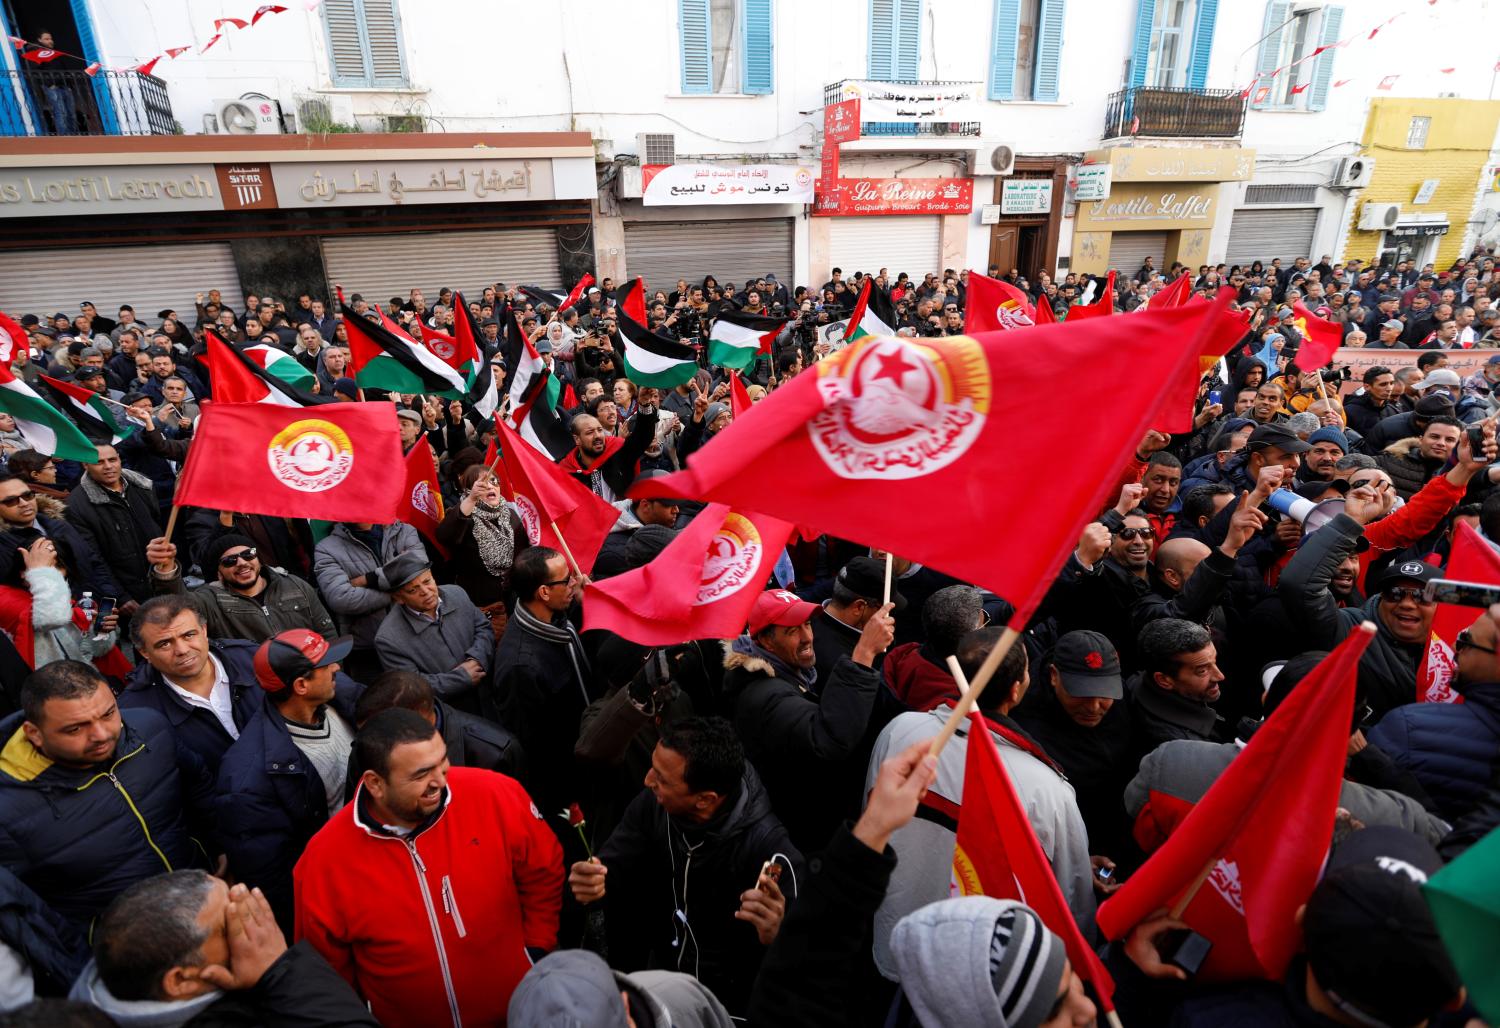 People gather during a nationwide strike against the government's refusal to raise wages in Tunis, Tunisia January 17, 2019. REUTERS/Zoubeir Souissi - RC180C53AD40